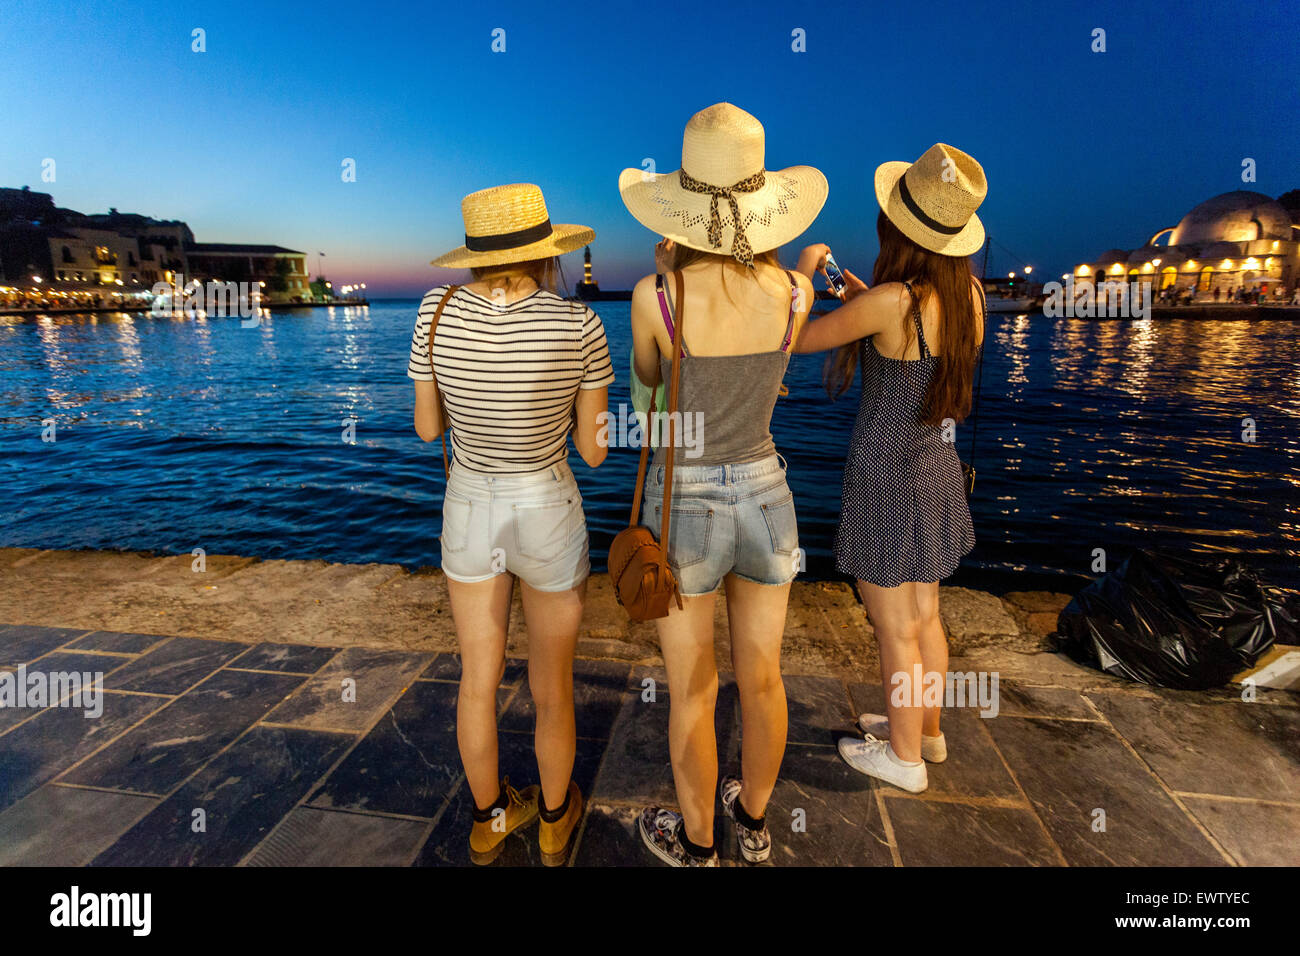 People Three young women in straw hats Chania harbour Crete tourists Greece at dusk Crete Chania Greece Rear View Sunset Scenery Stock Photo